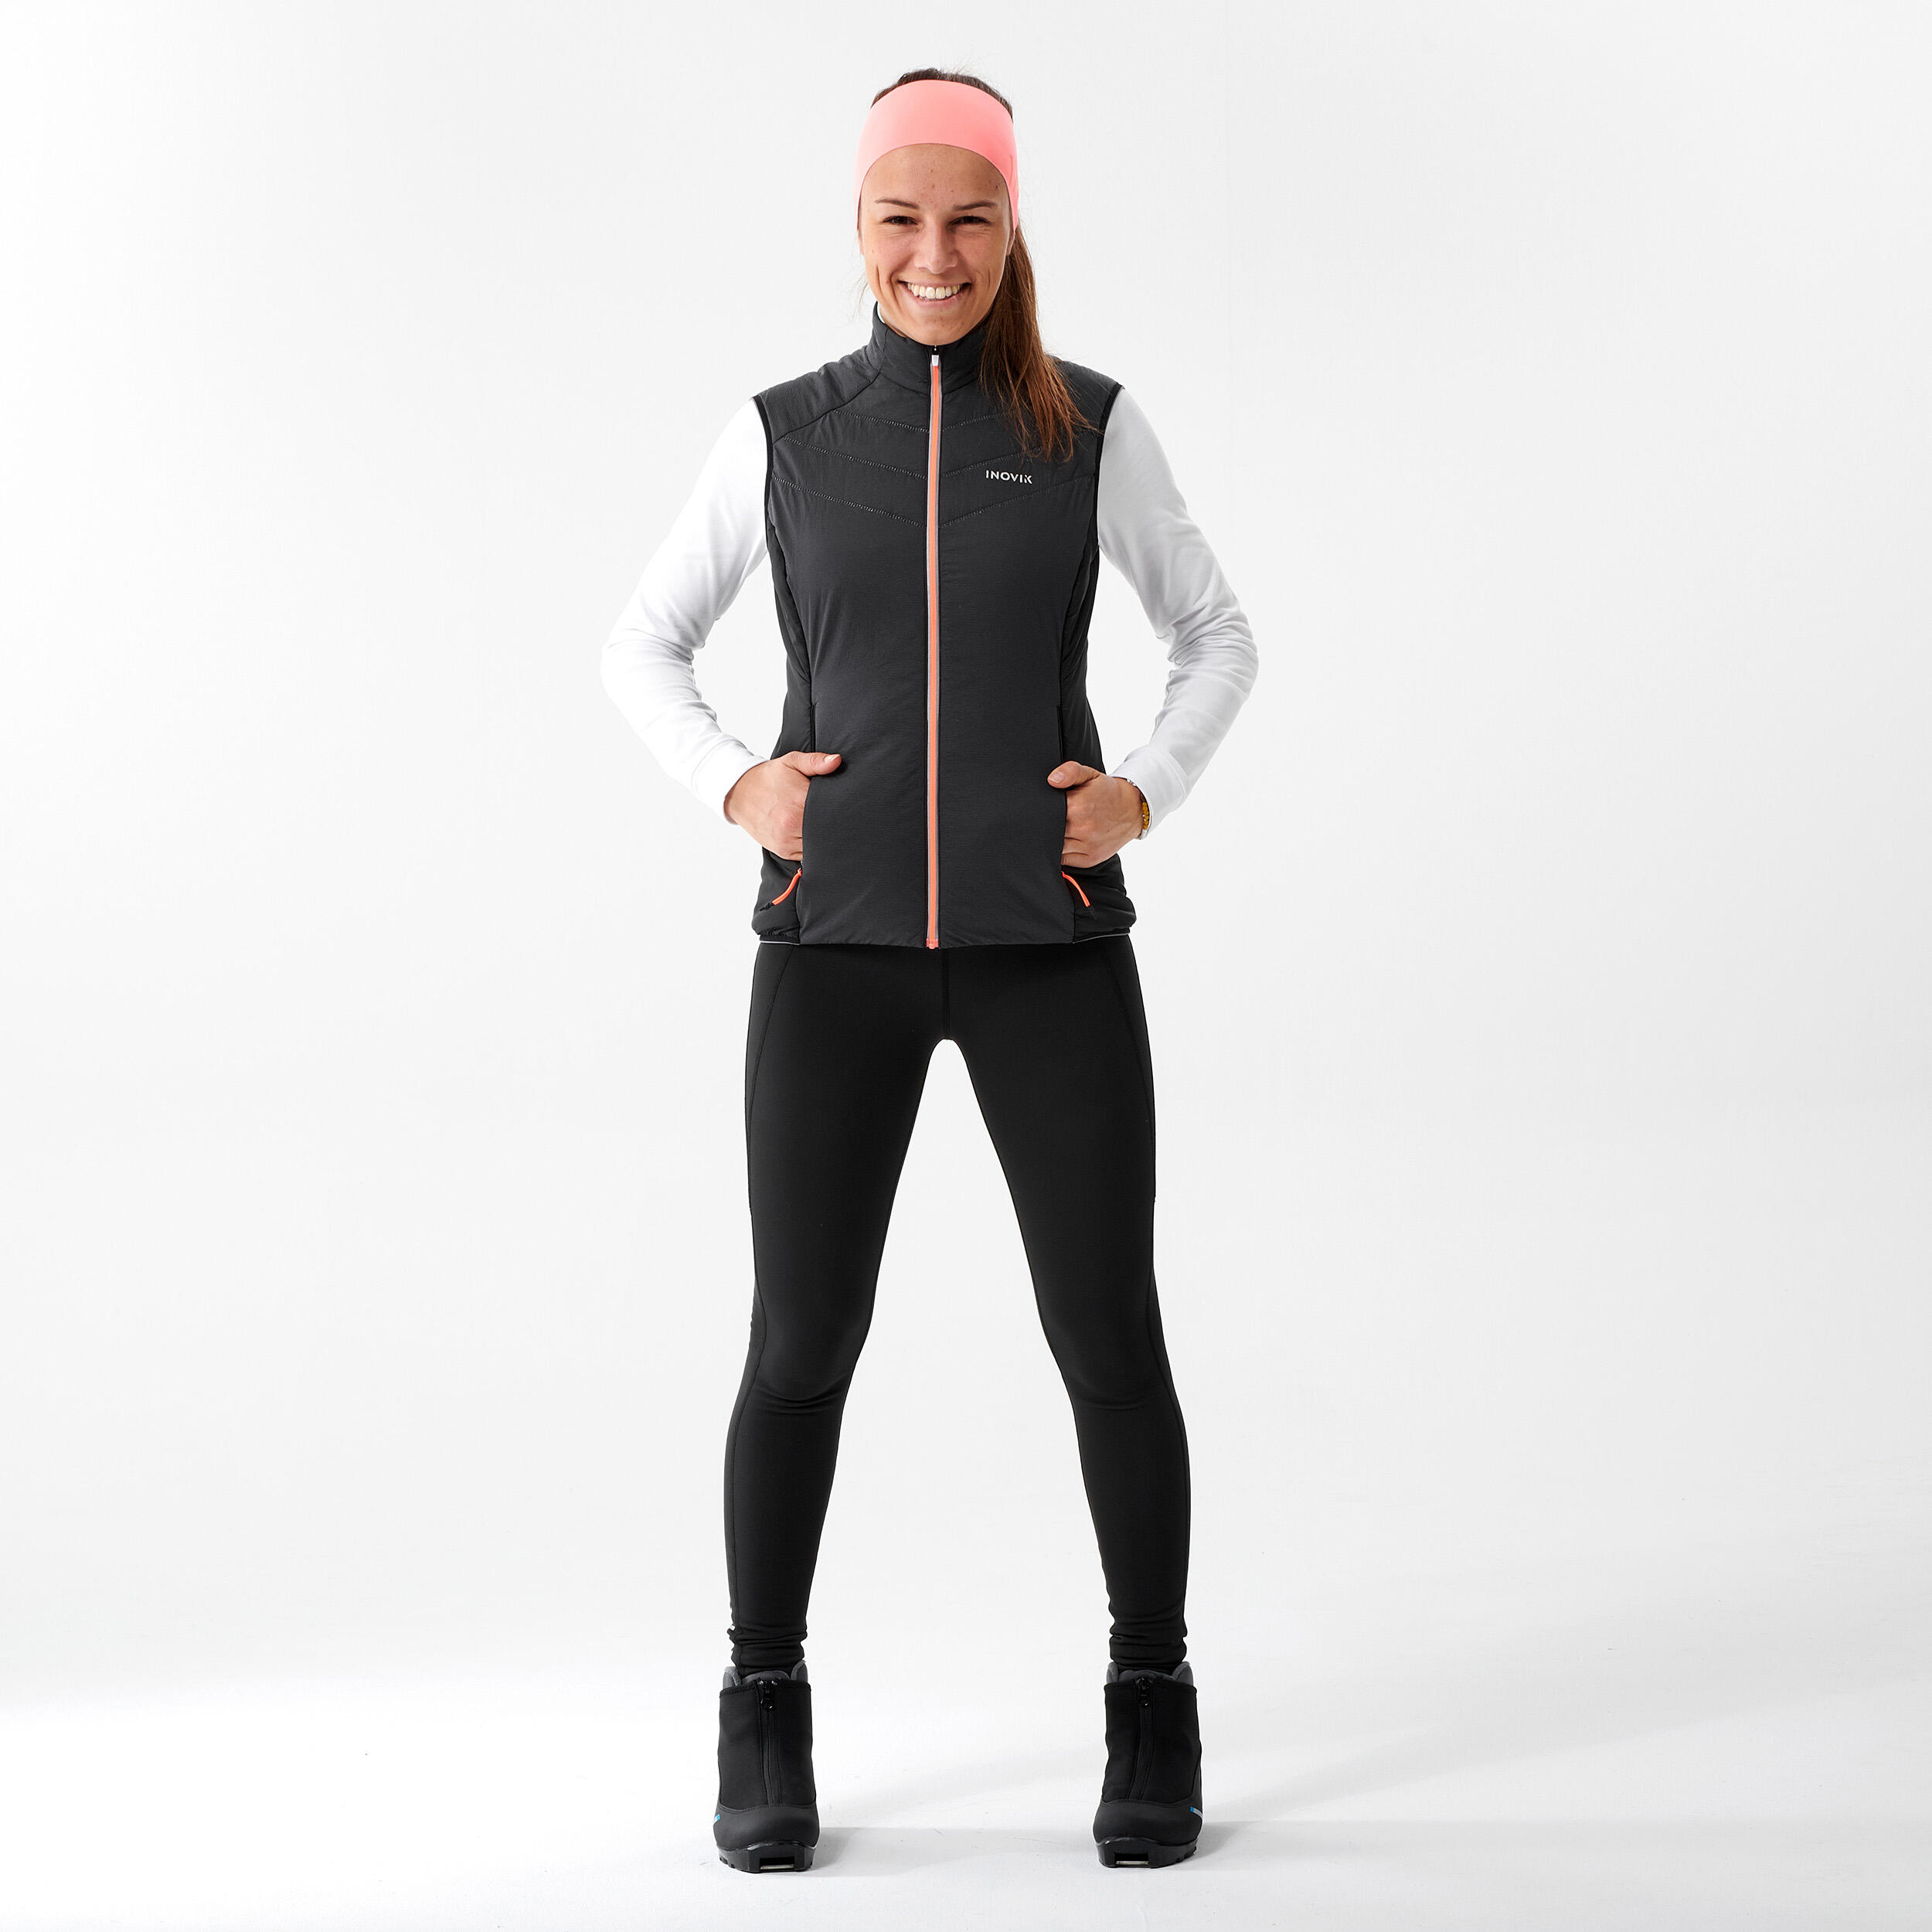 Stretch fleece tights for winter hiking, cycling, skiing, and more. : r/myog